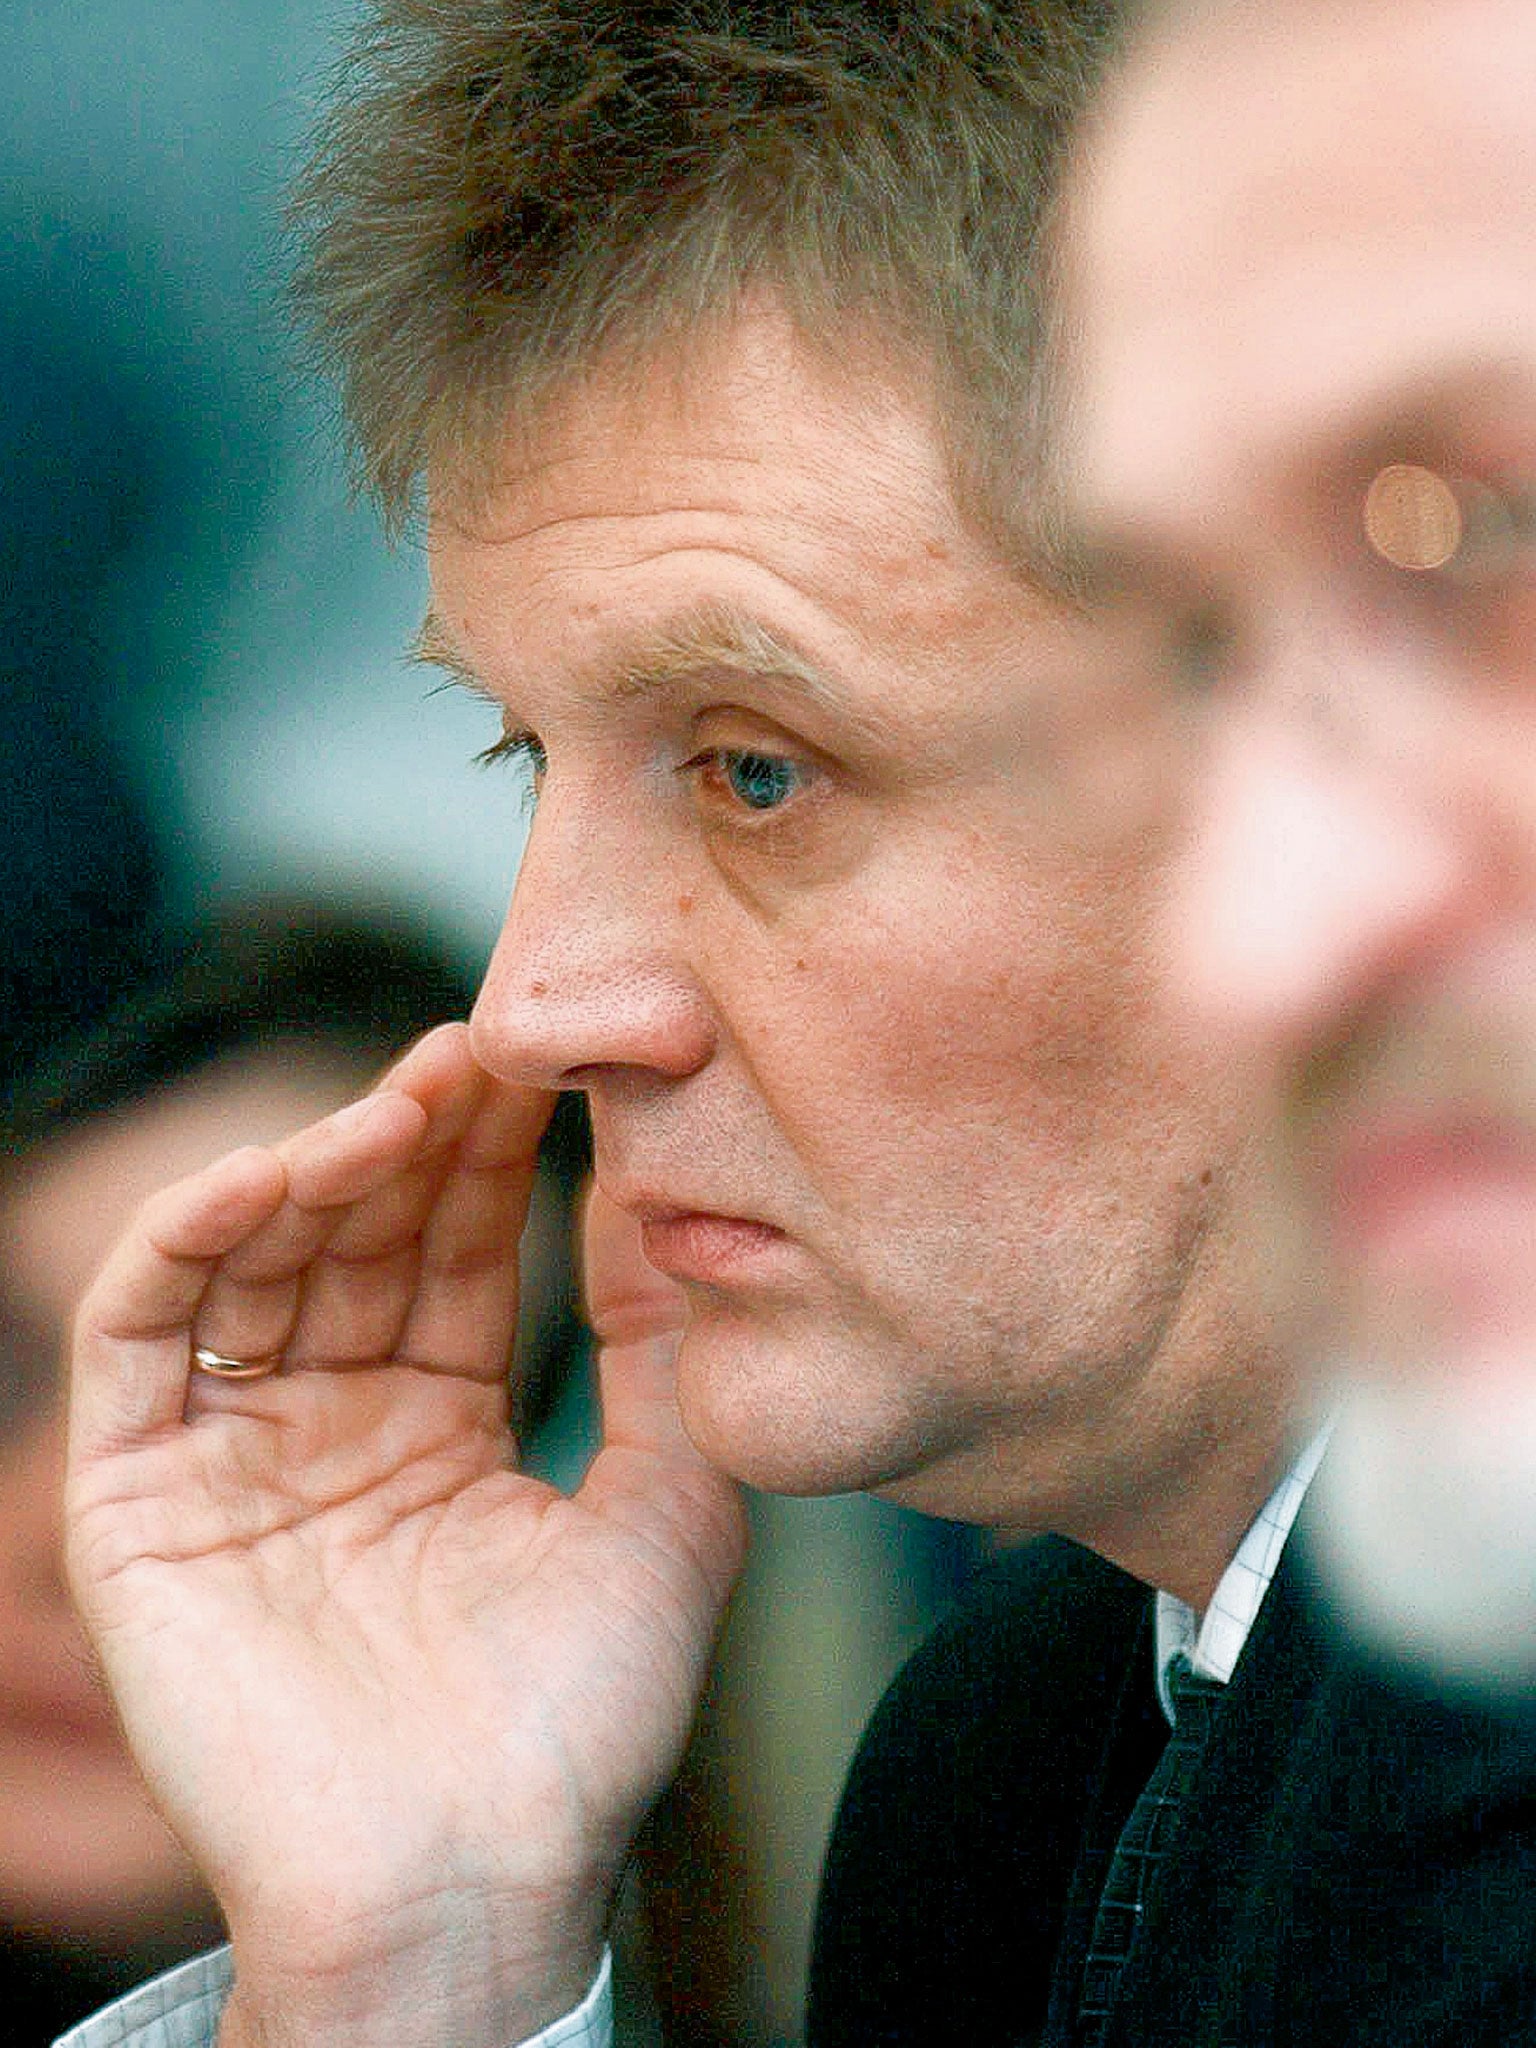 Litvinenko at a press conference in London in 2004 when he was involved in efforts to try to resolve the conflict in Chechnya (Getty)